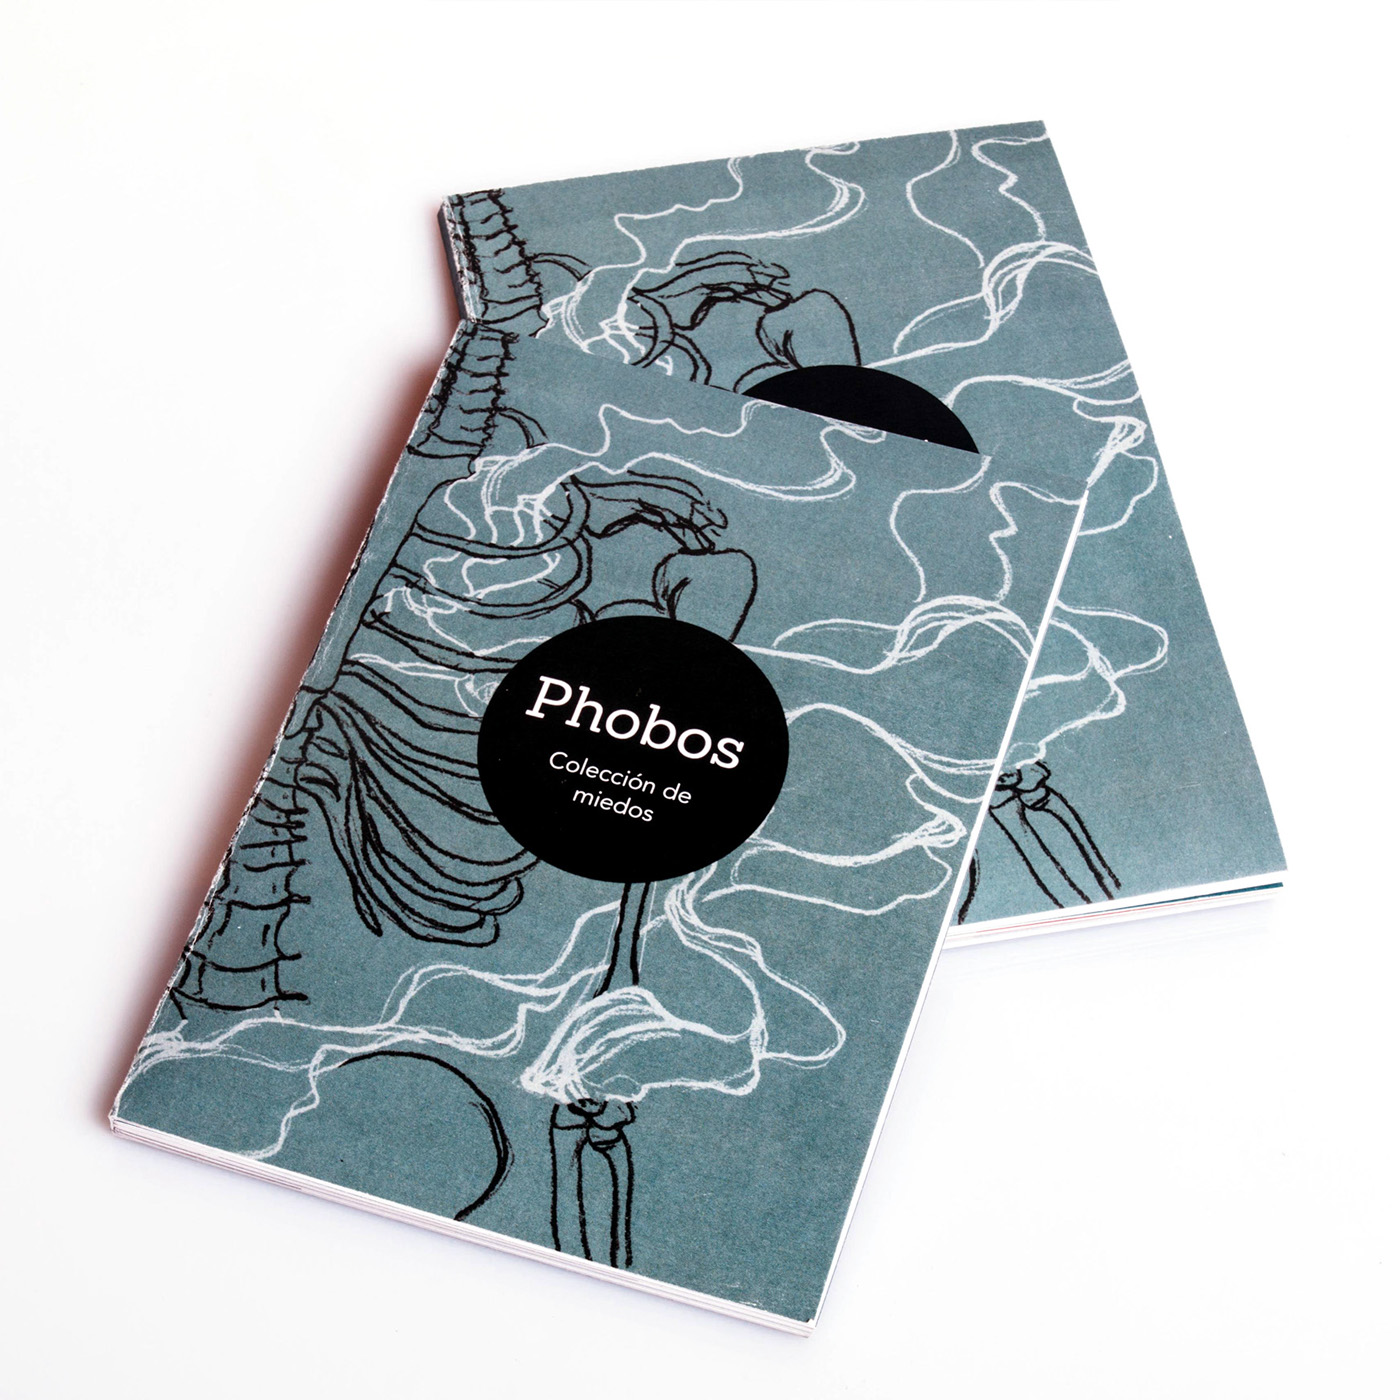 Phobia collection | Book cover